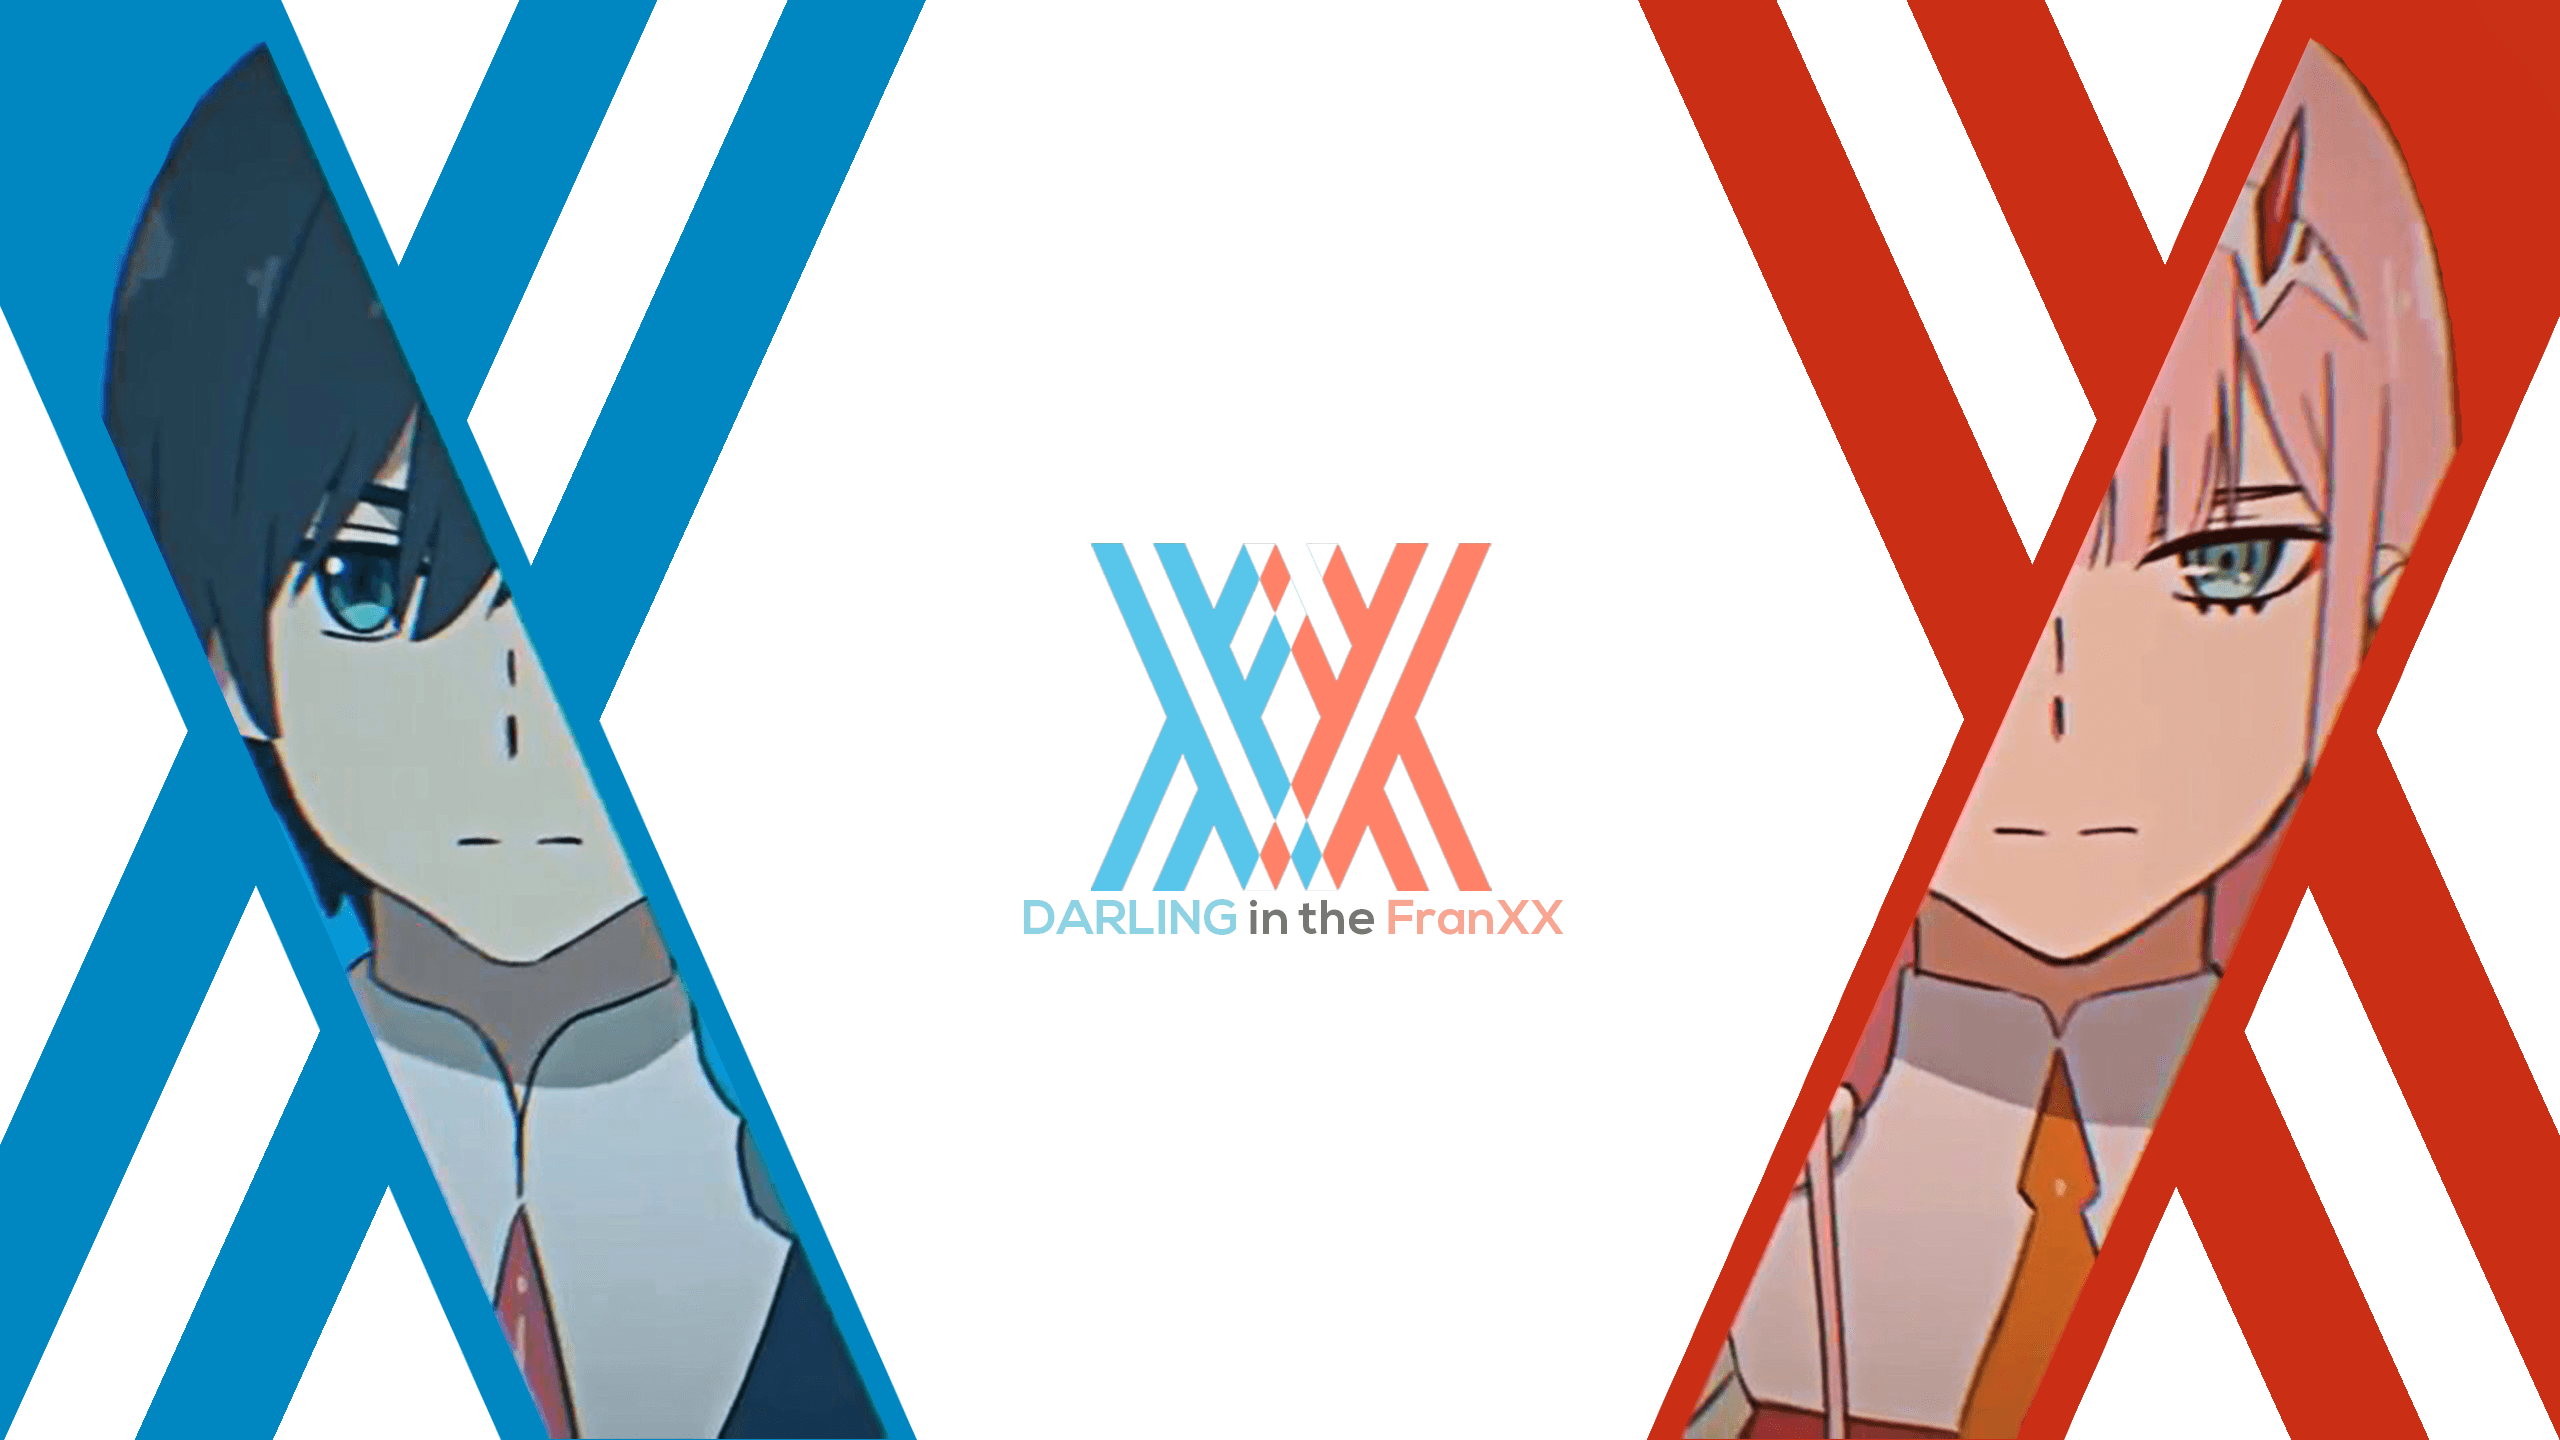 Hiro And Zero Two Wallpapers - Wallpaper Cave